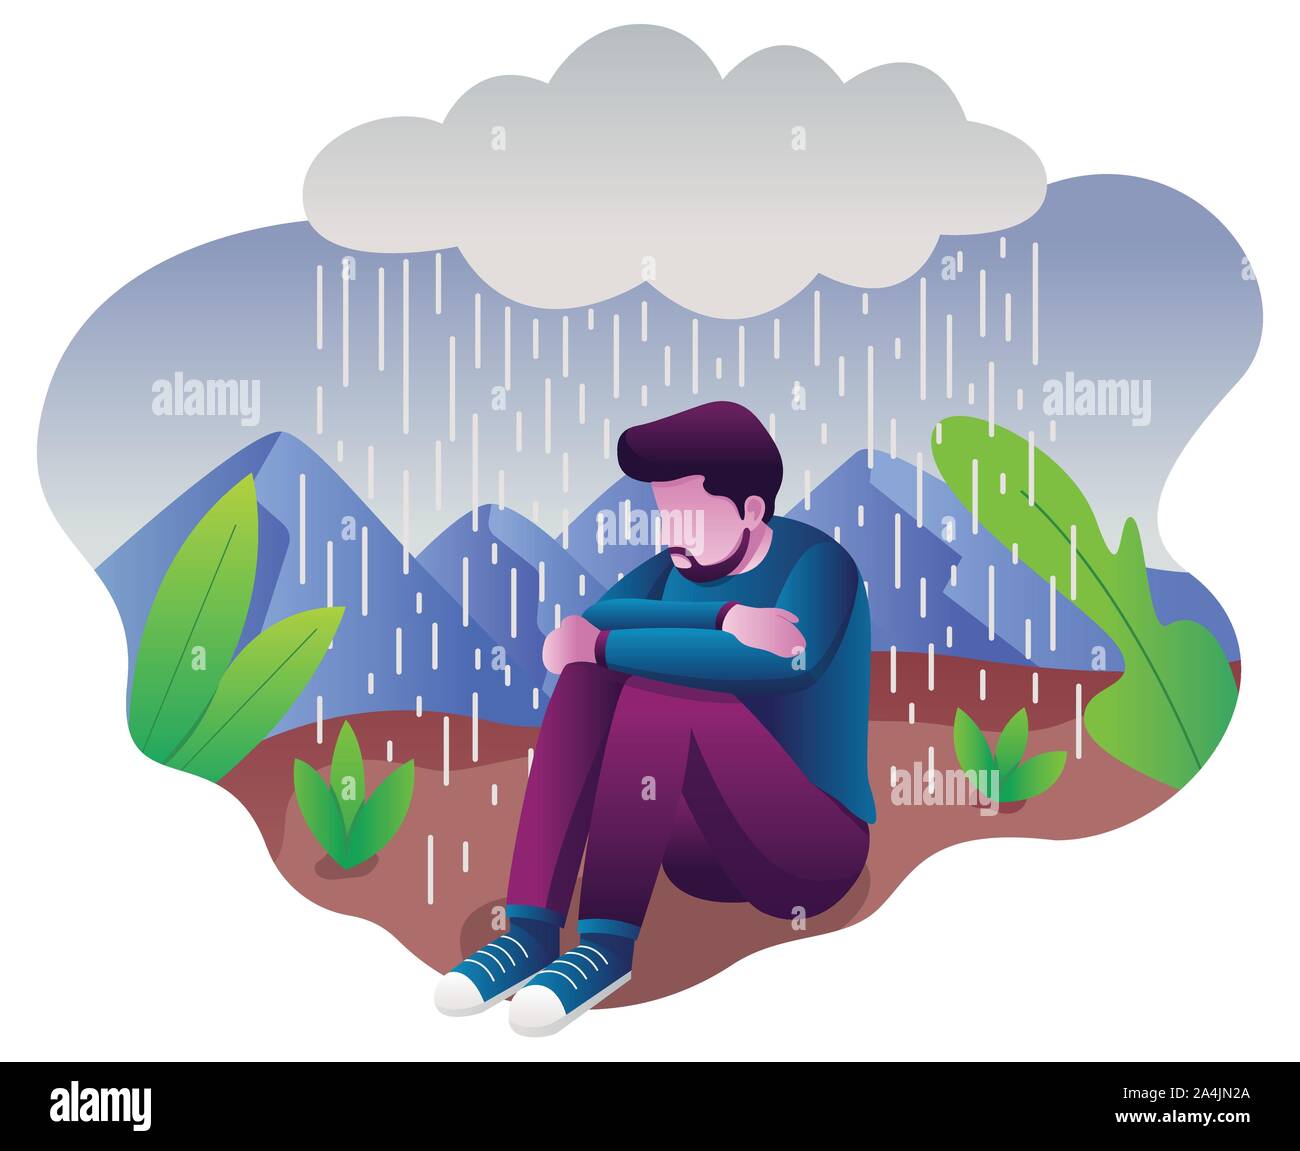 Woman in Depression Stock Vector